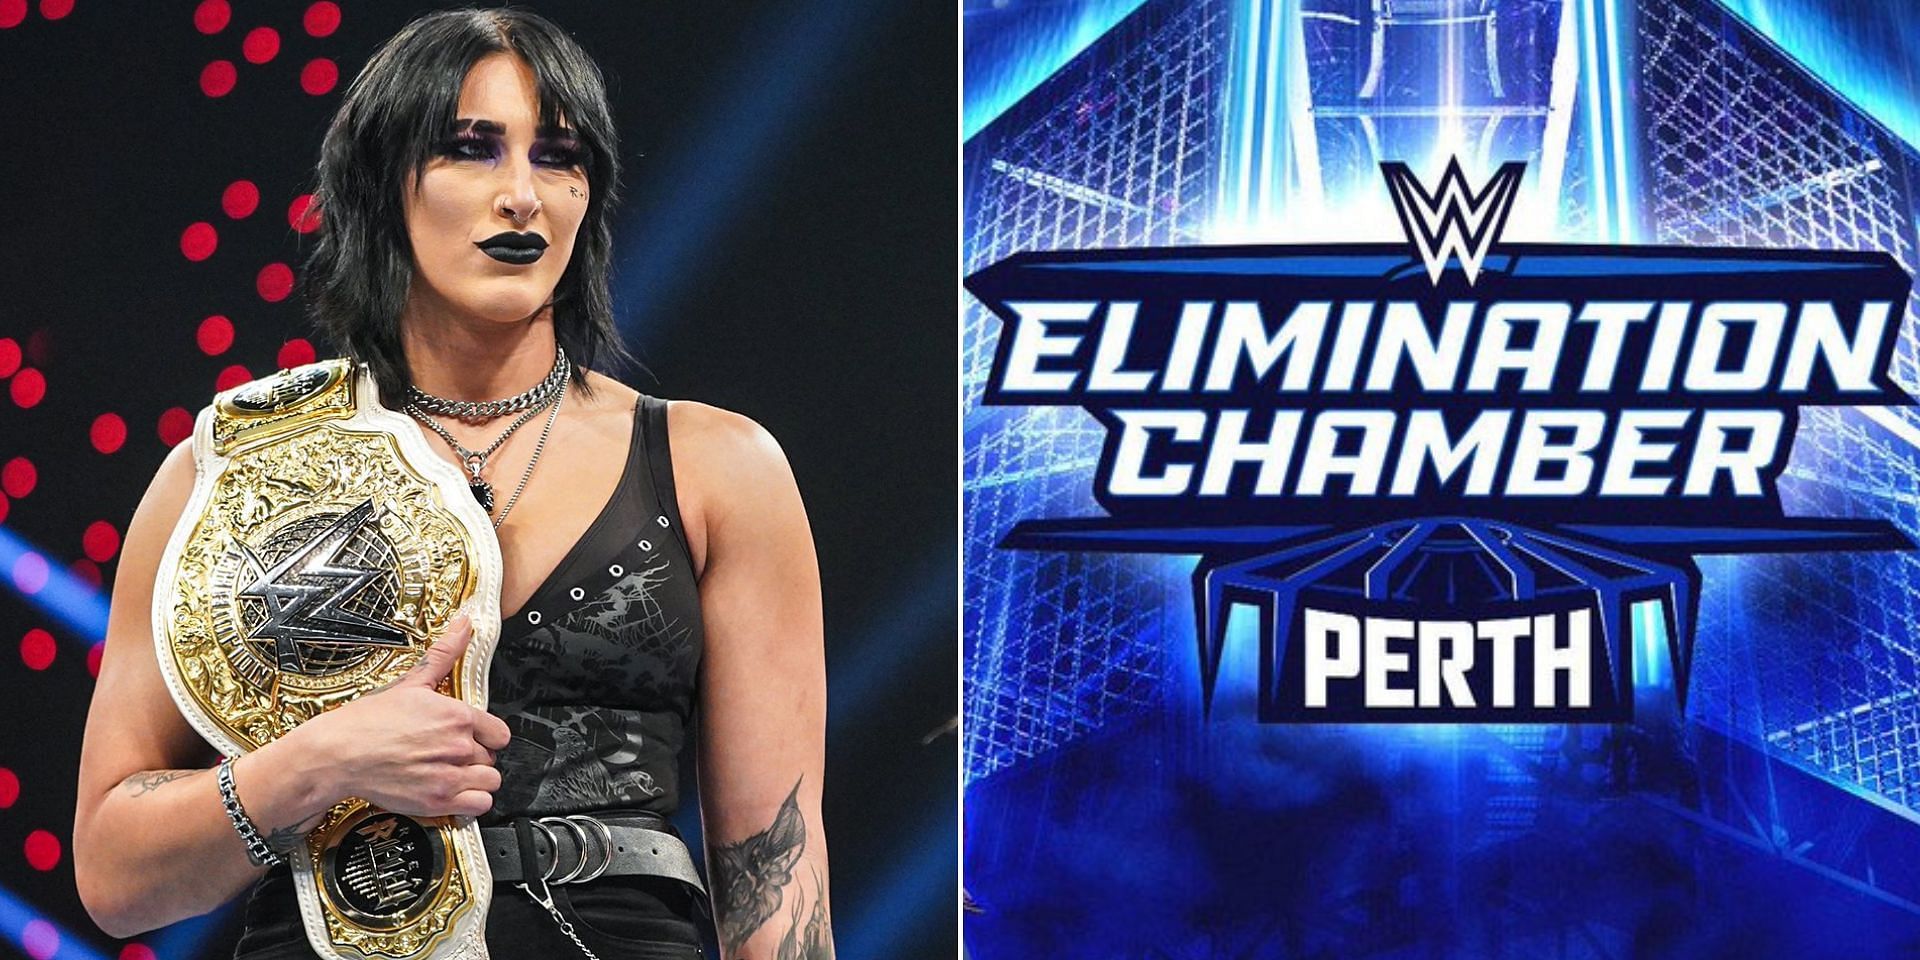 Rhea Ripley will defend her title at Elimination Chamber